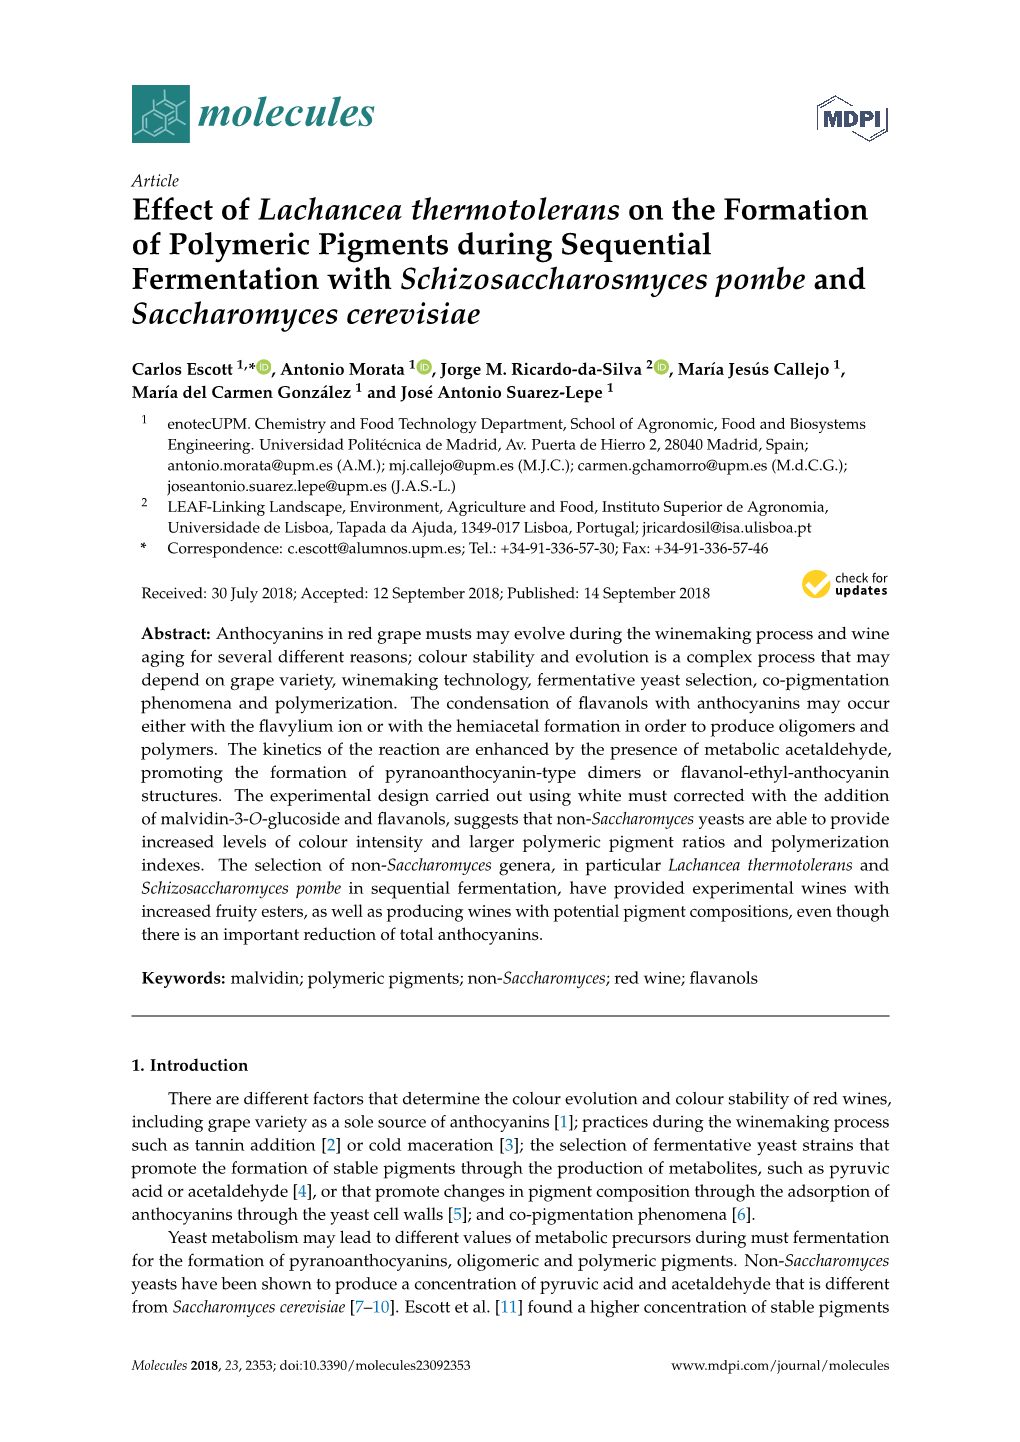 Effect of Lachancea Thermotolerans on the Formation of Polymeric Pigments During Sequential Fermentation with Schizosaccharosmyces Pombe and Saccharomyces Cerevisiae